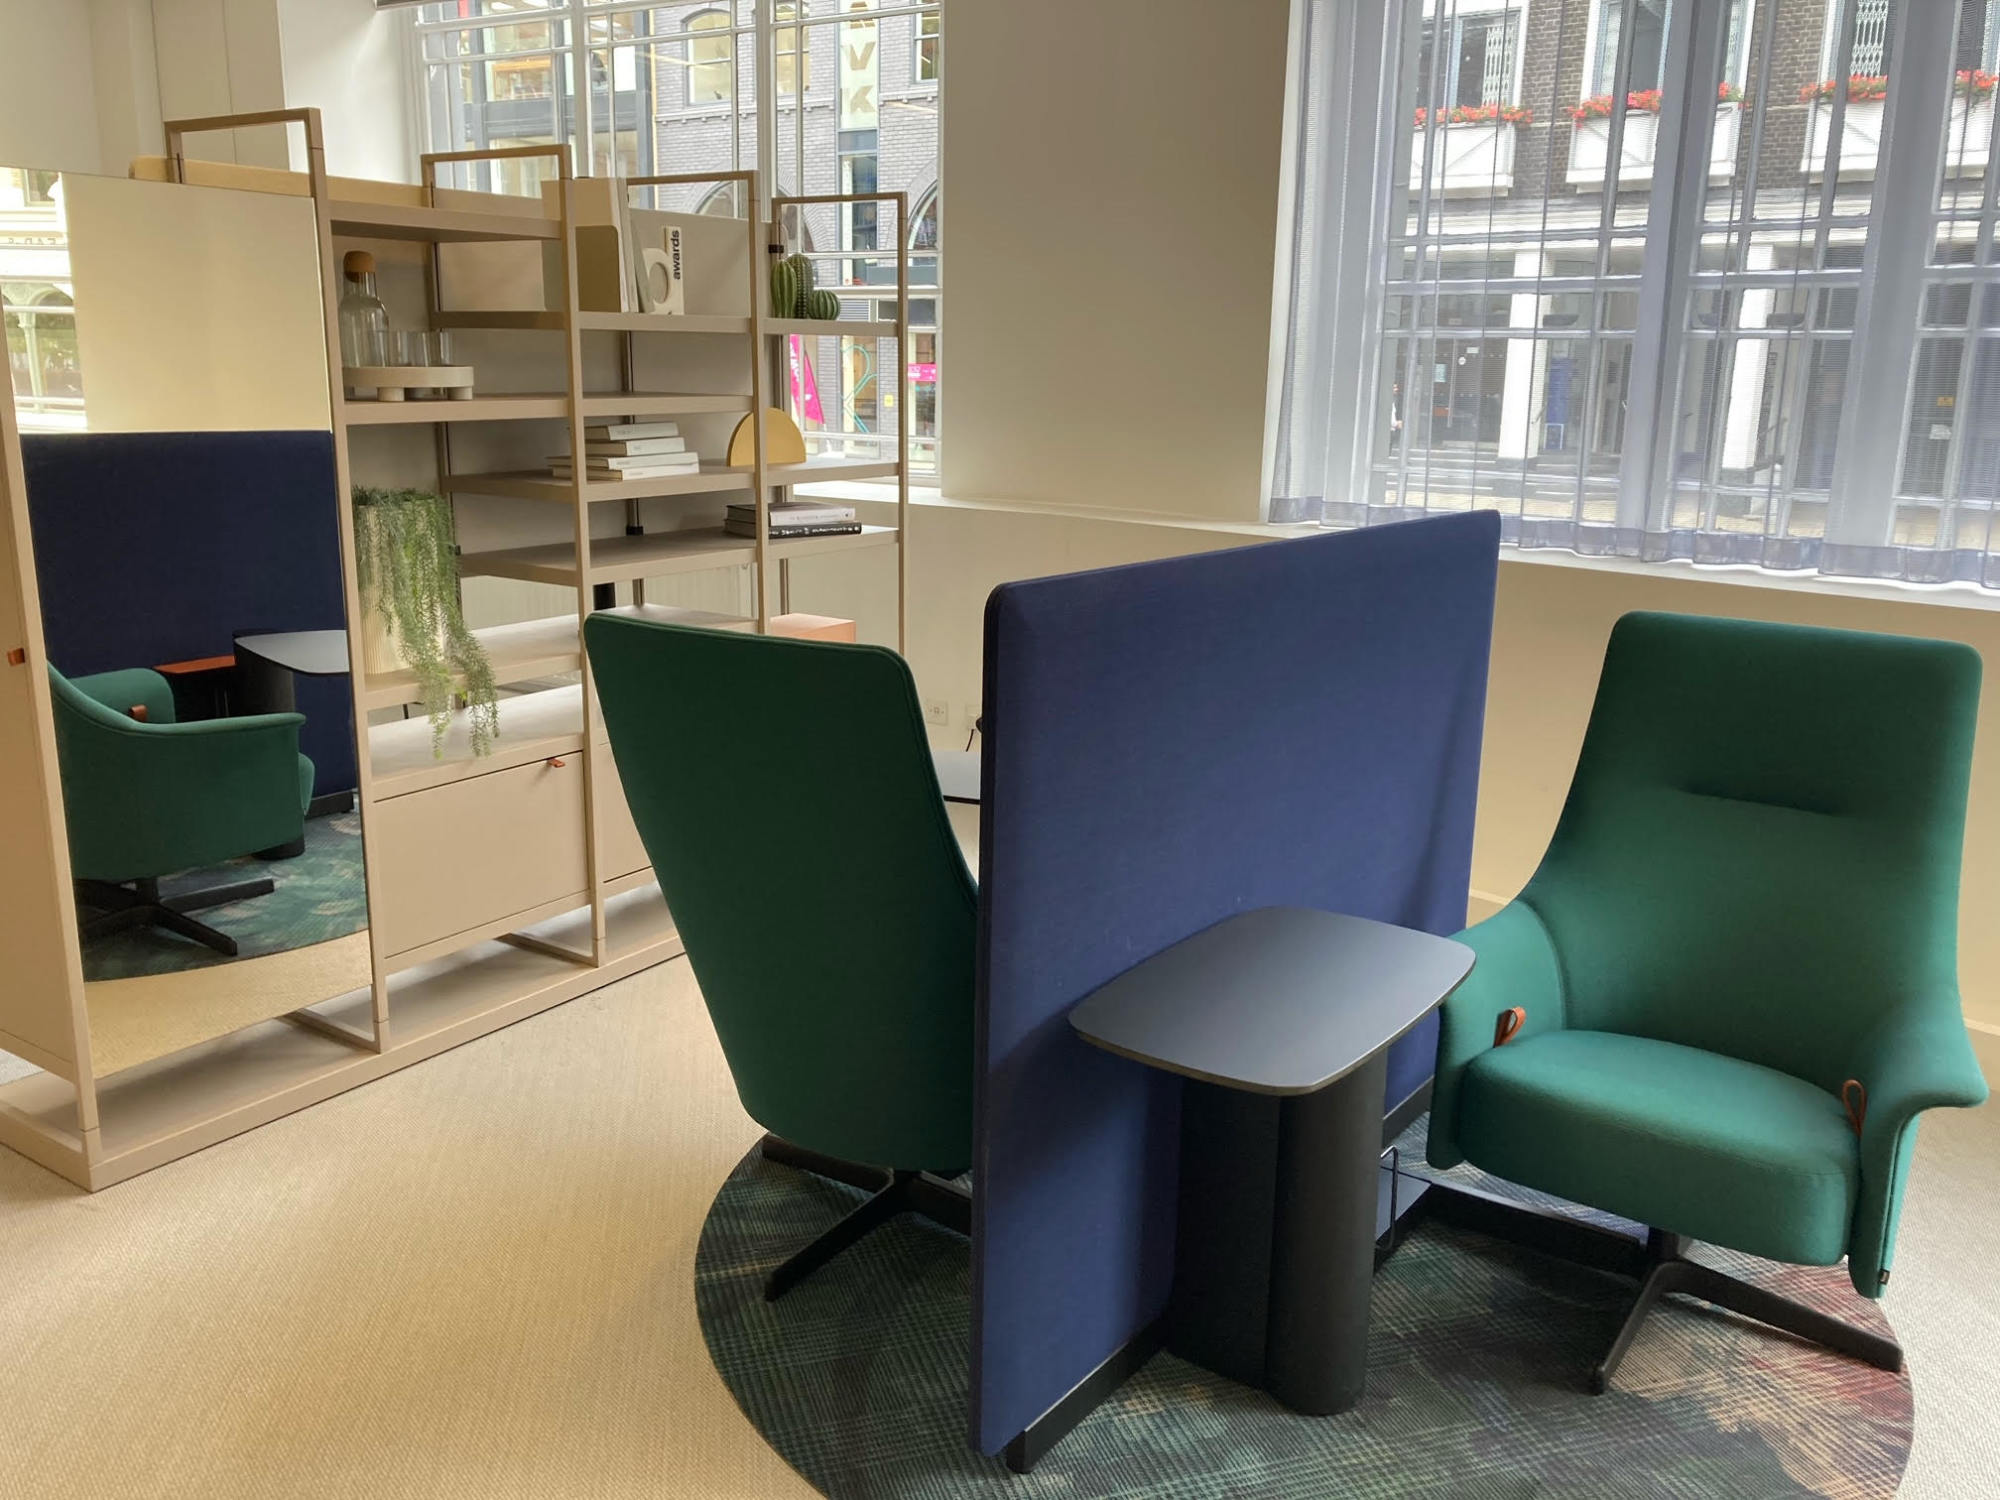 A Bene office furniture concept showing two chairs within an office space